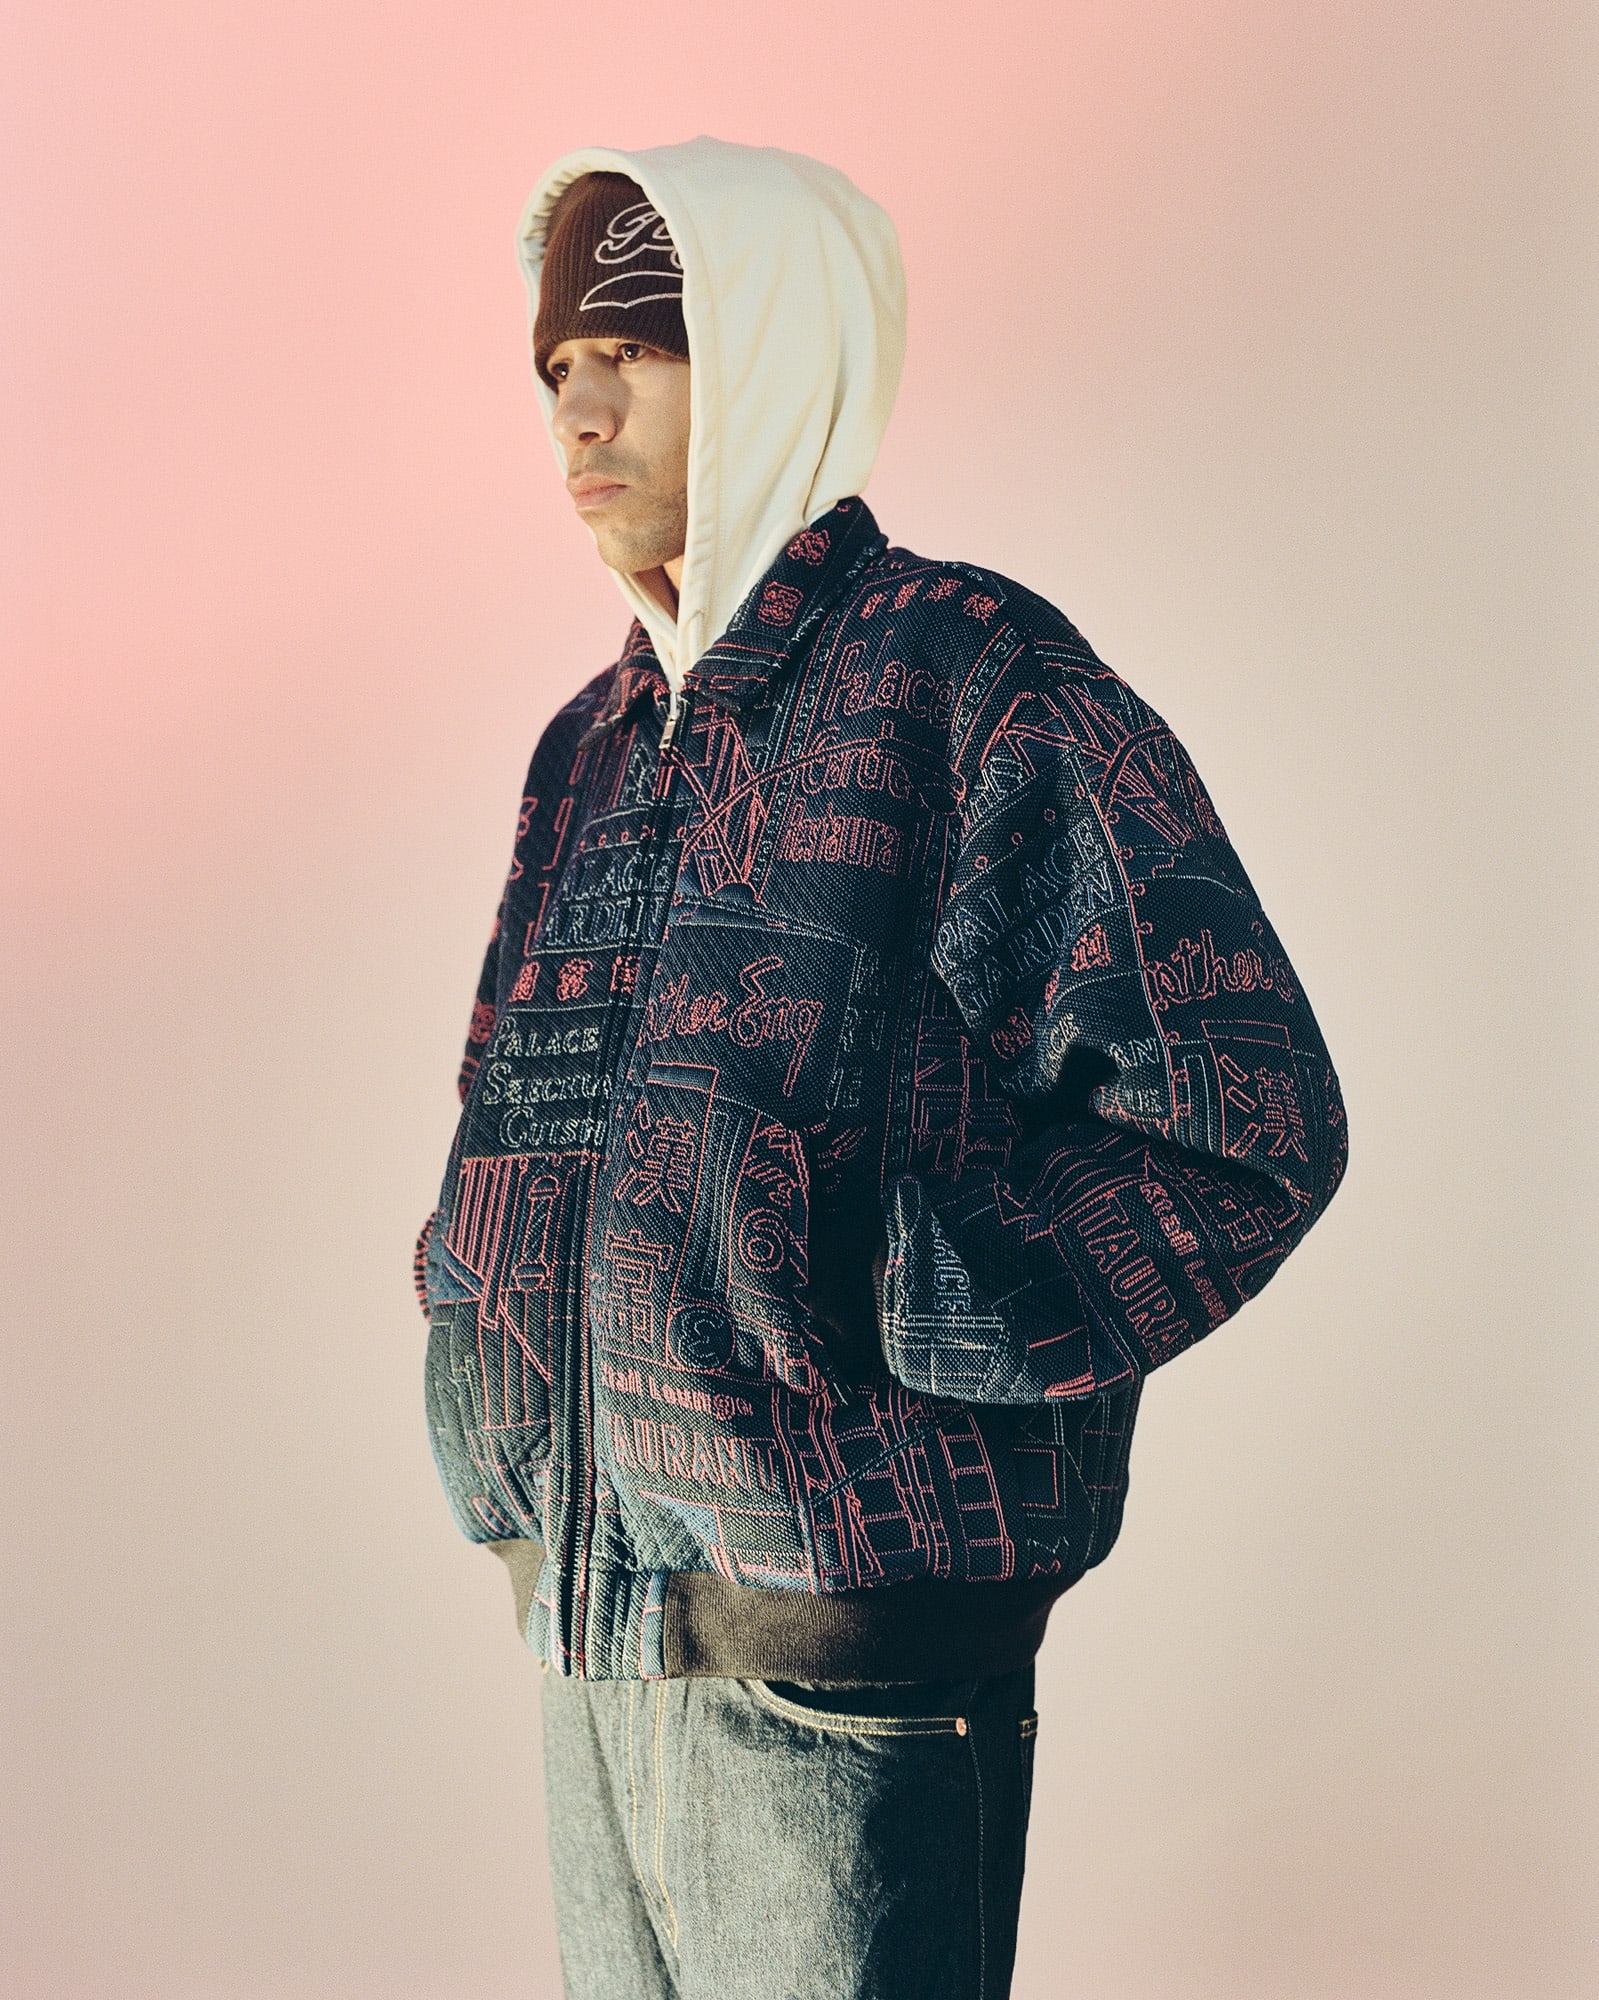 Palace lookbook model is shown